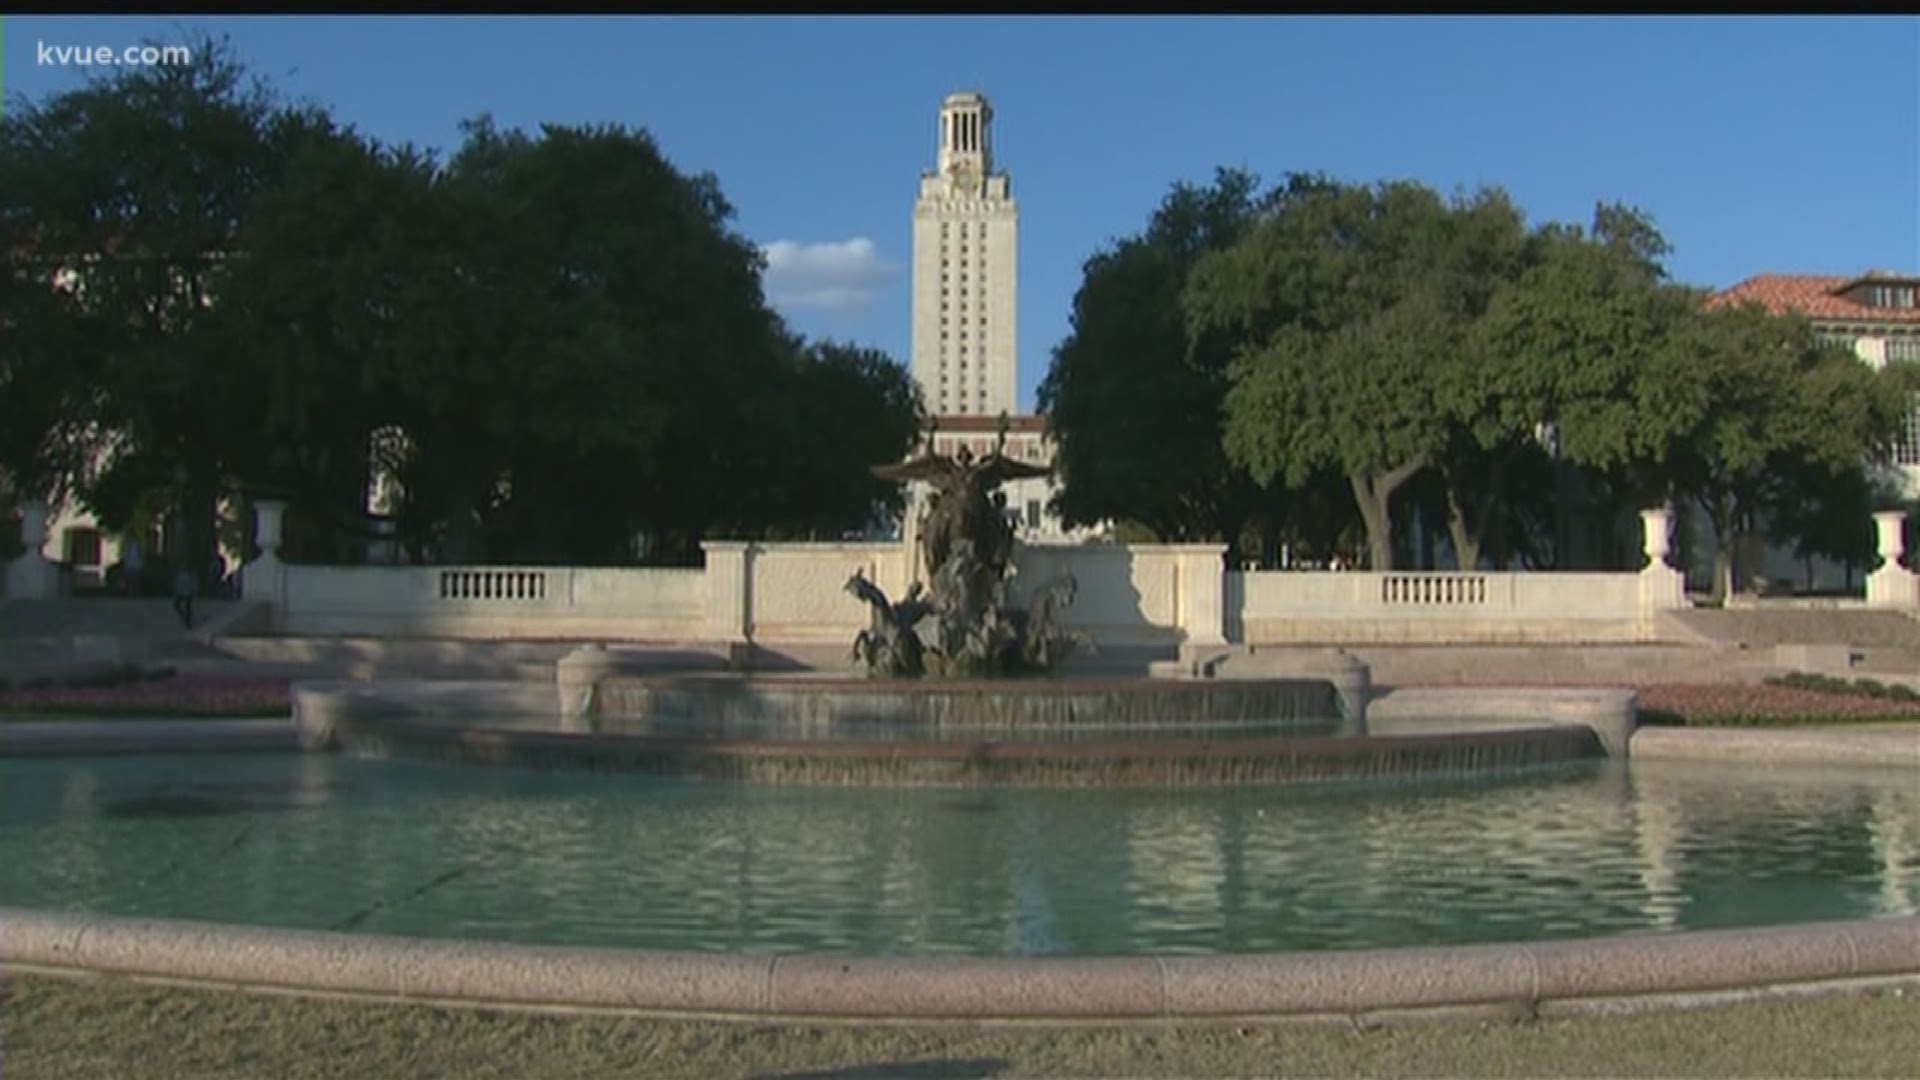 A UT health official confirmed that one student has been diagnosed with the mumps.